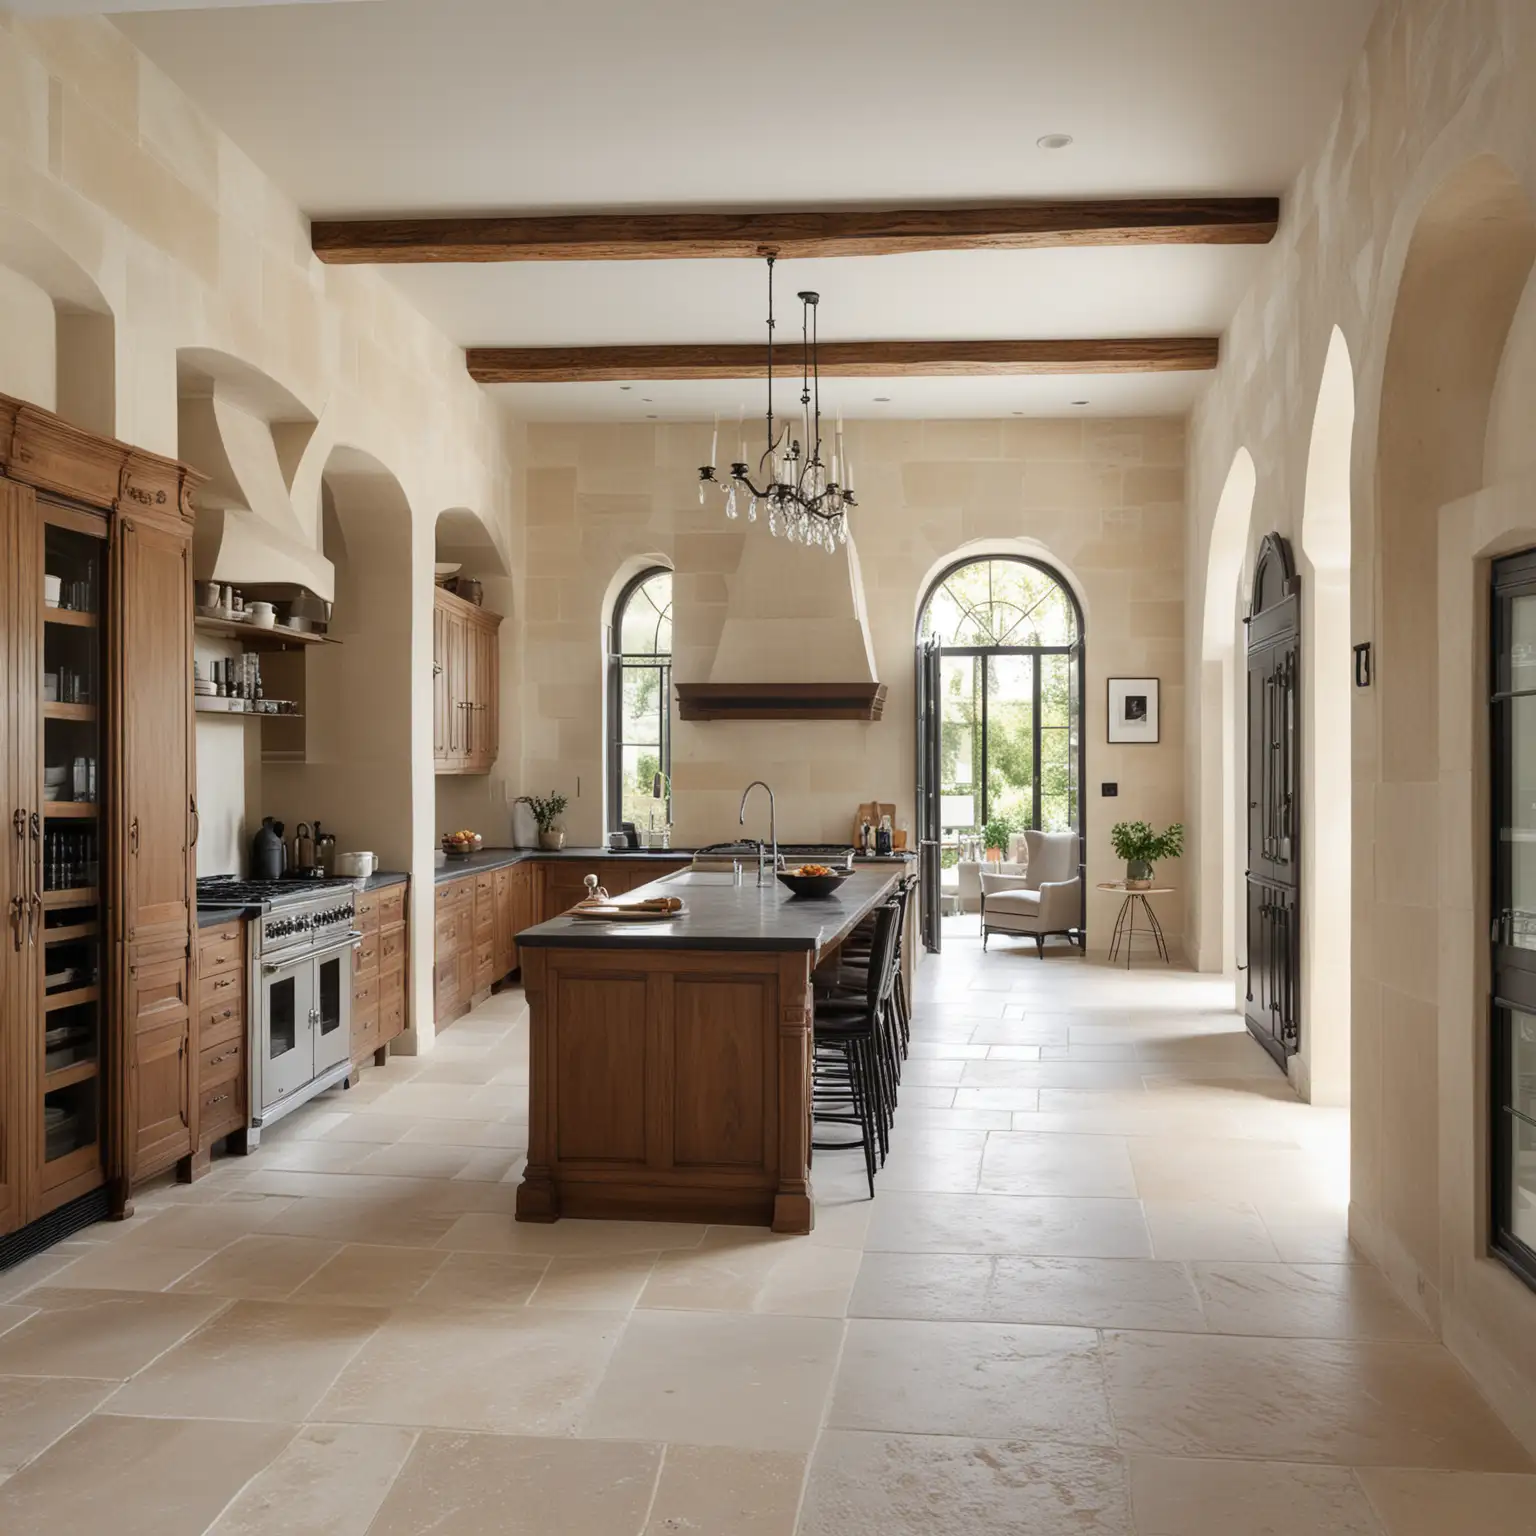 Modern French Chateau Estate Home Kitchen with Limewash Walls and Walnut Accents